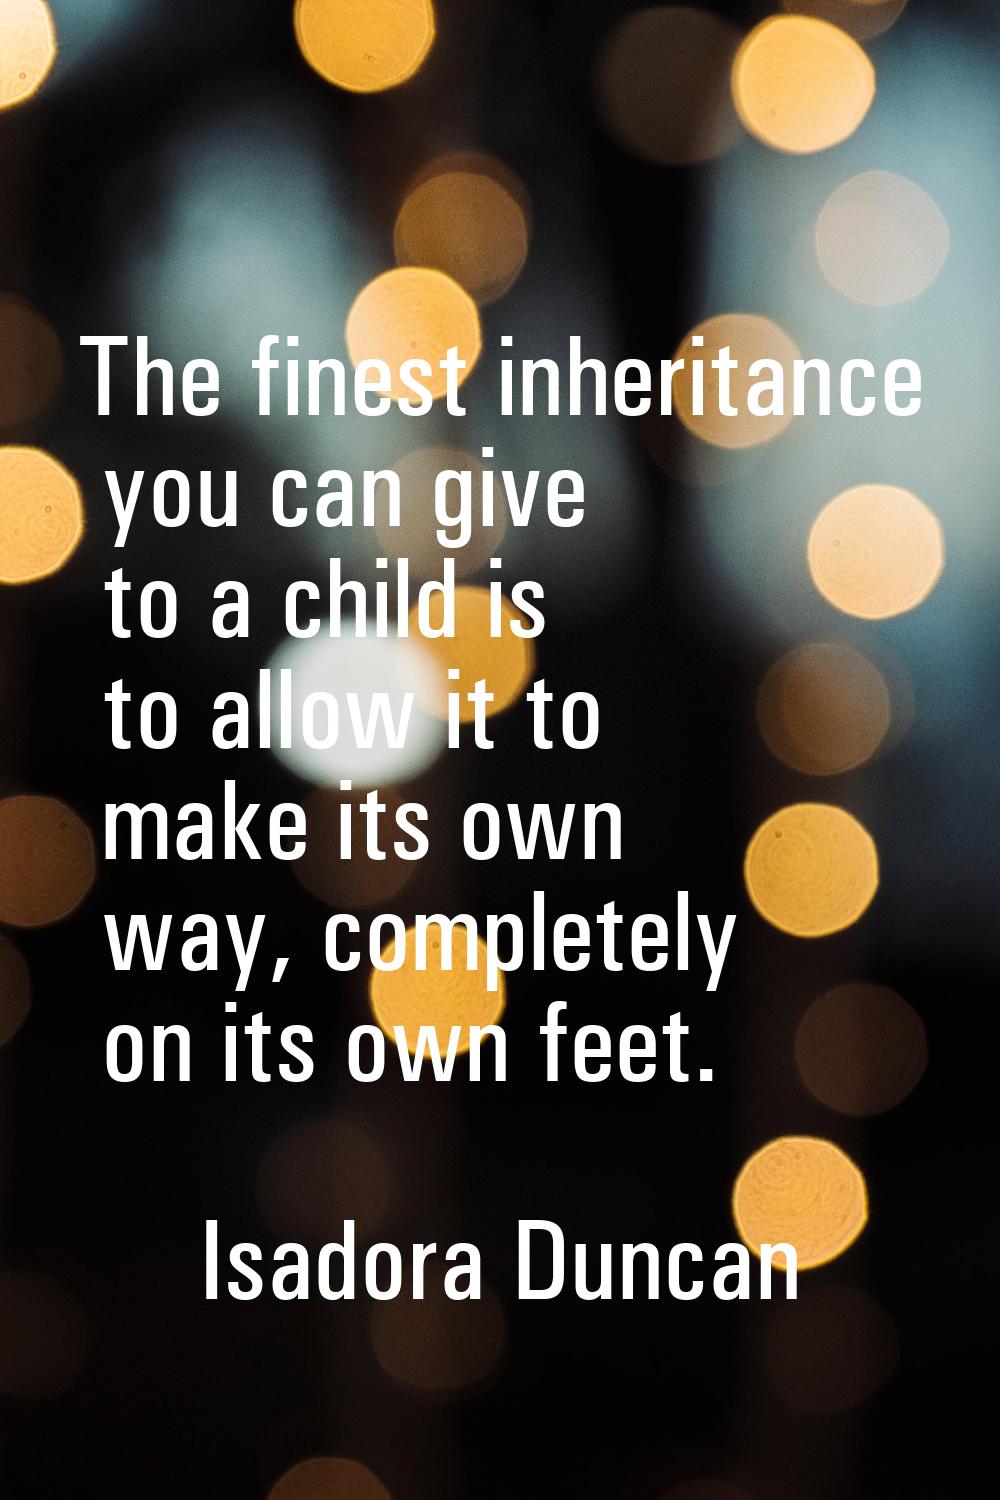 The finest inheritance you can give to a child is to allow it to make its own way, completely on it